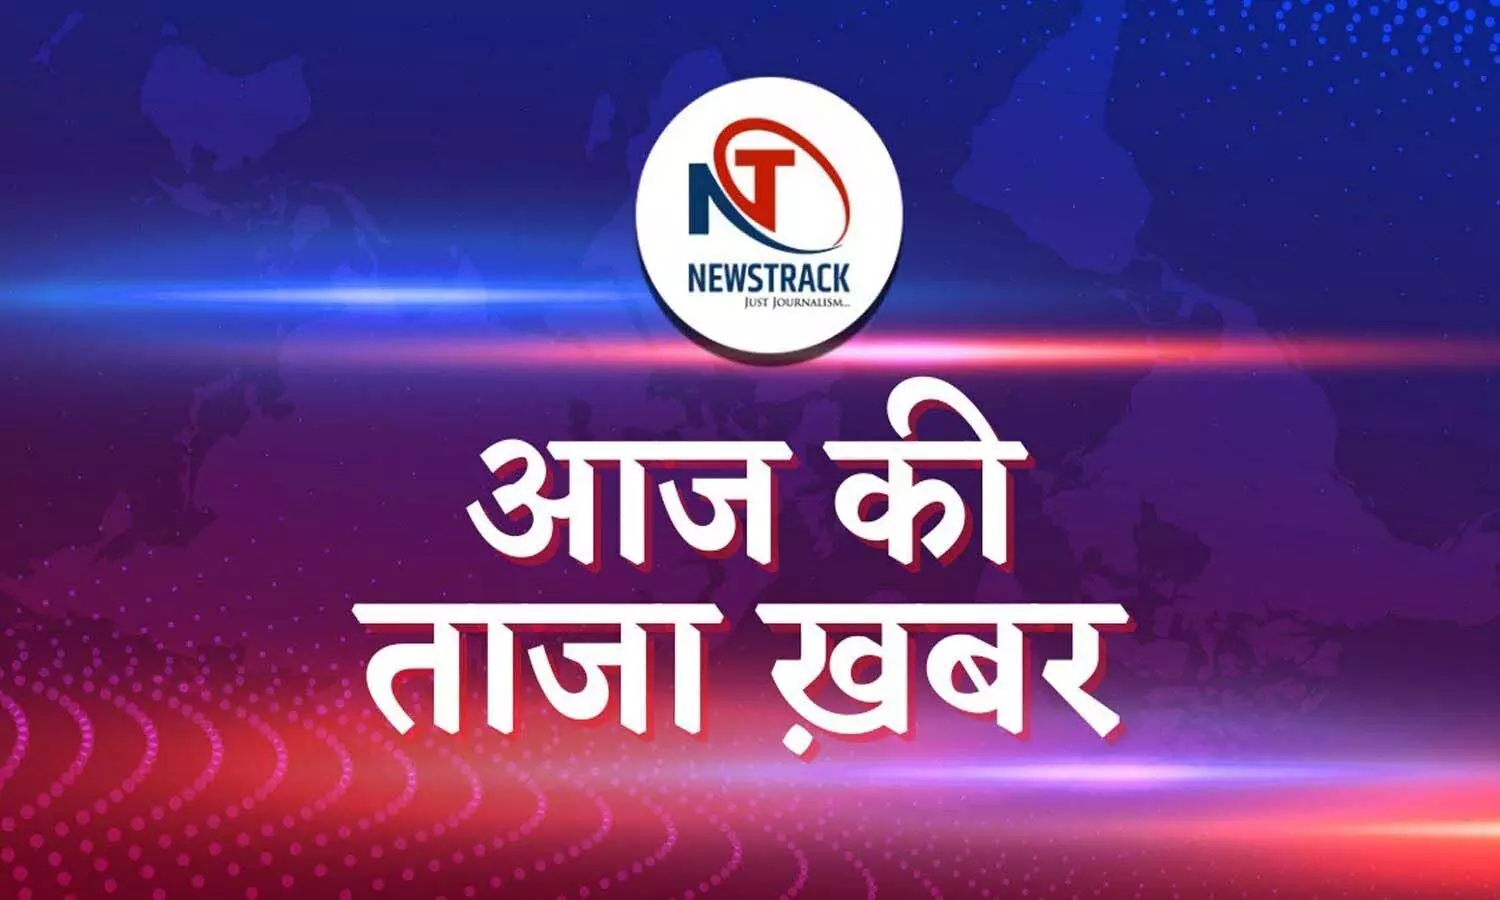 Keep an eye on these major news of today, you will get complete details on Newstrack